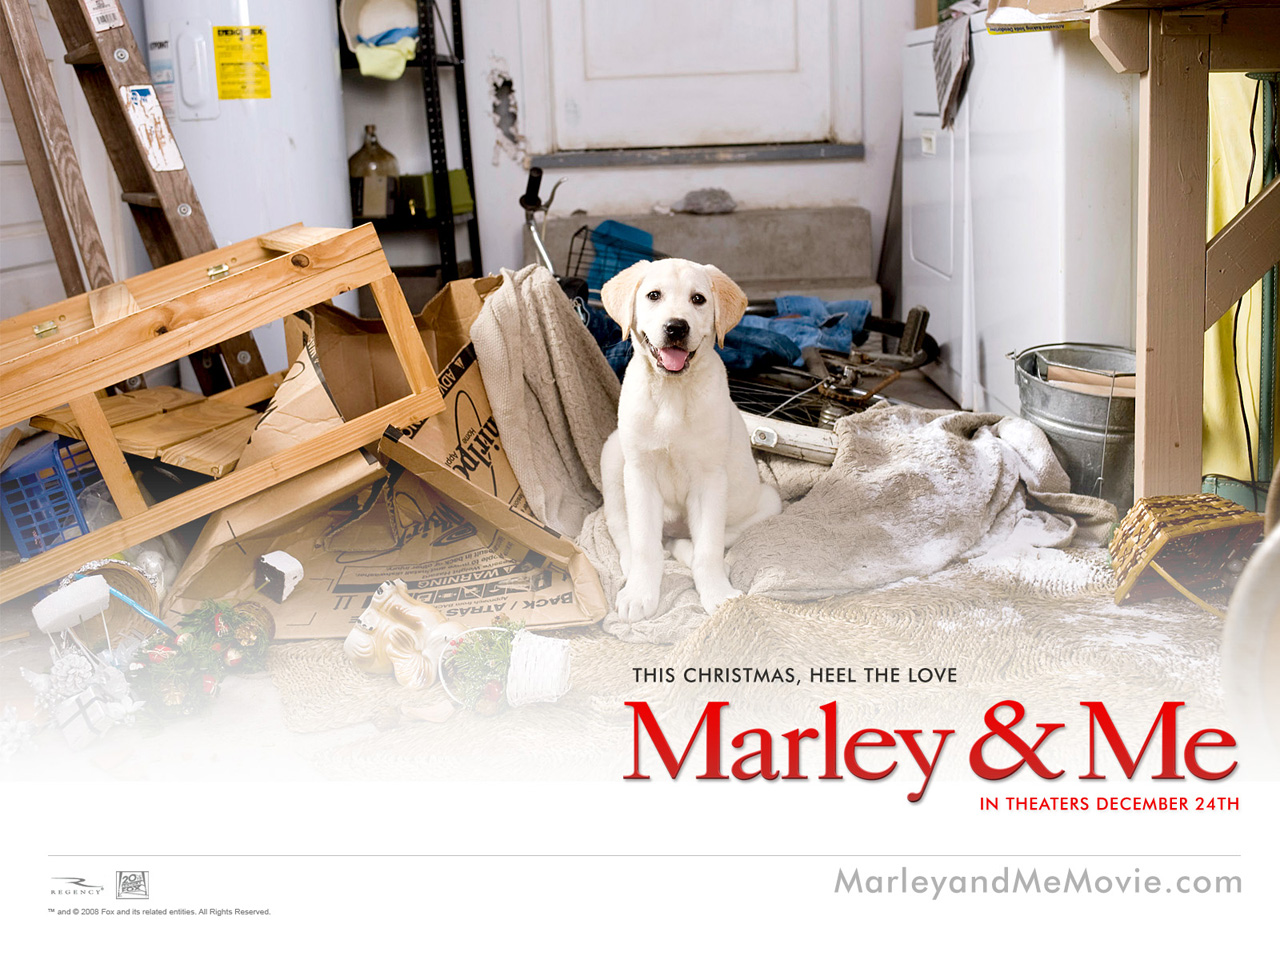 Marley and Me movie wallpaper Wallpapers - HD Wallpapers 19754